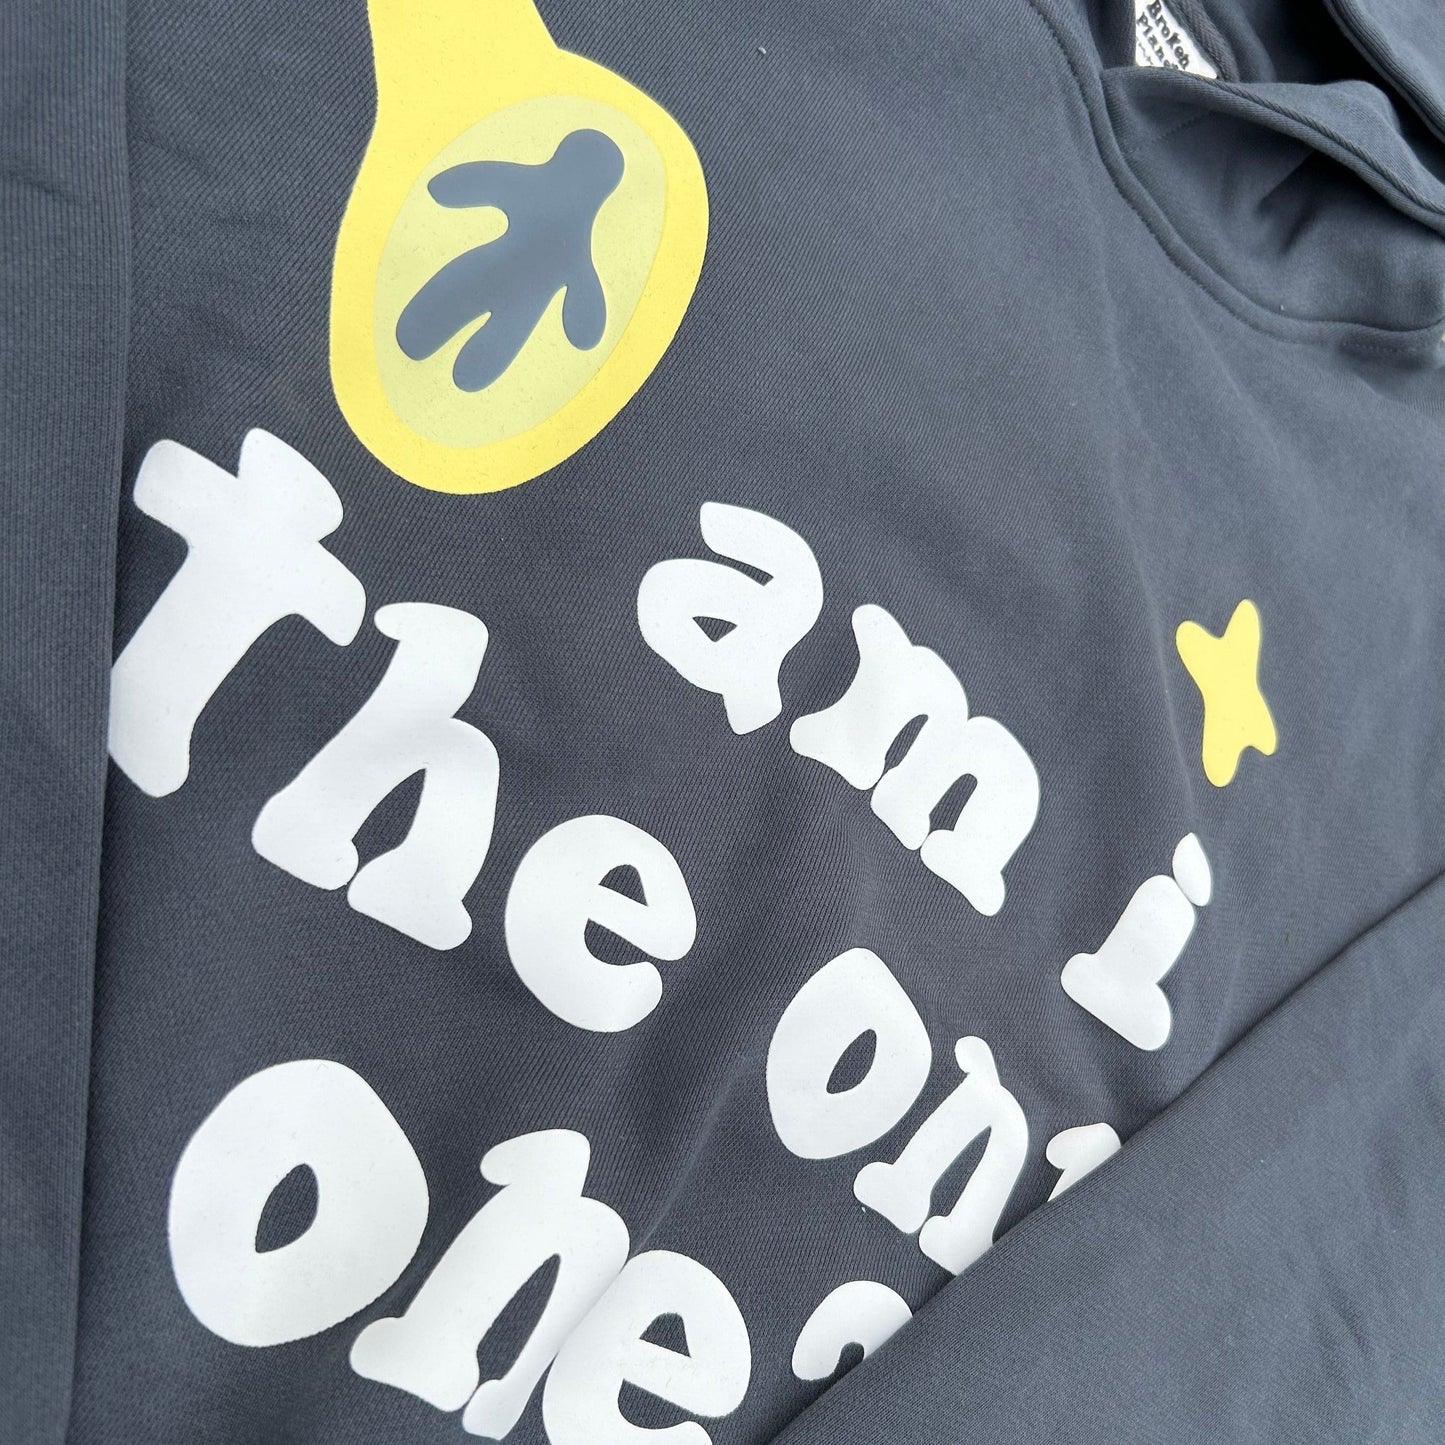 Broken Planet "Am I The Only One" Hoodie